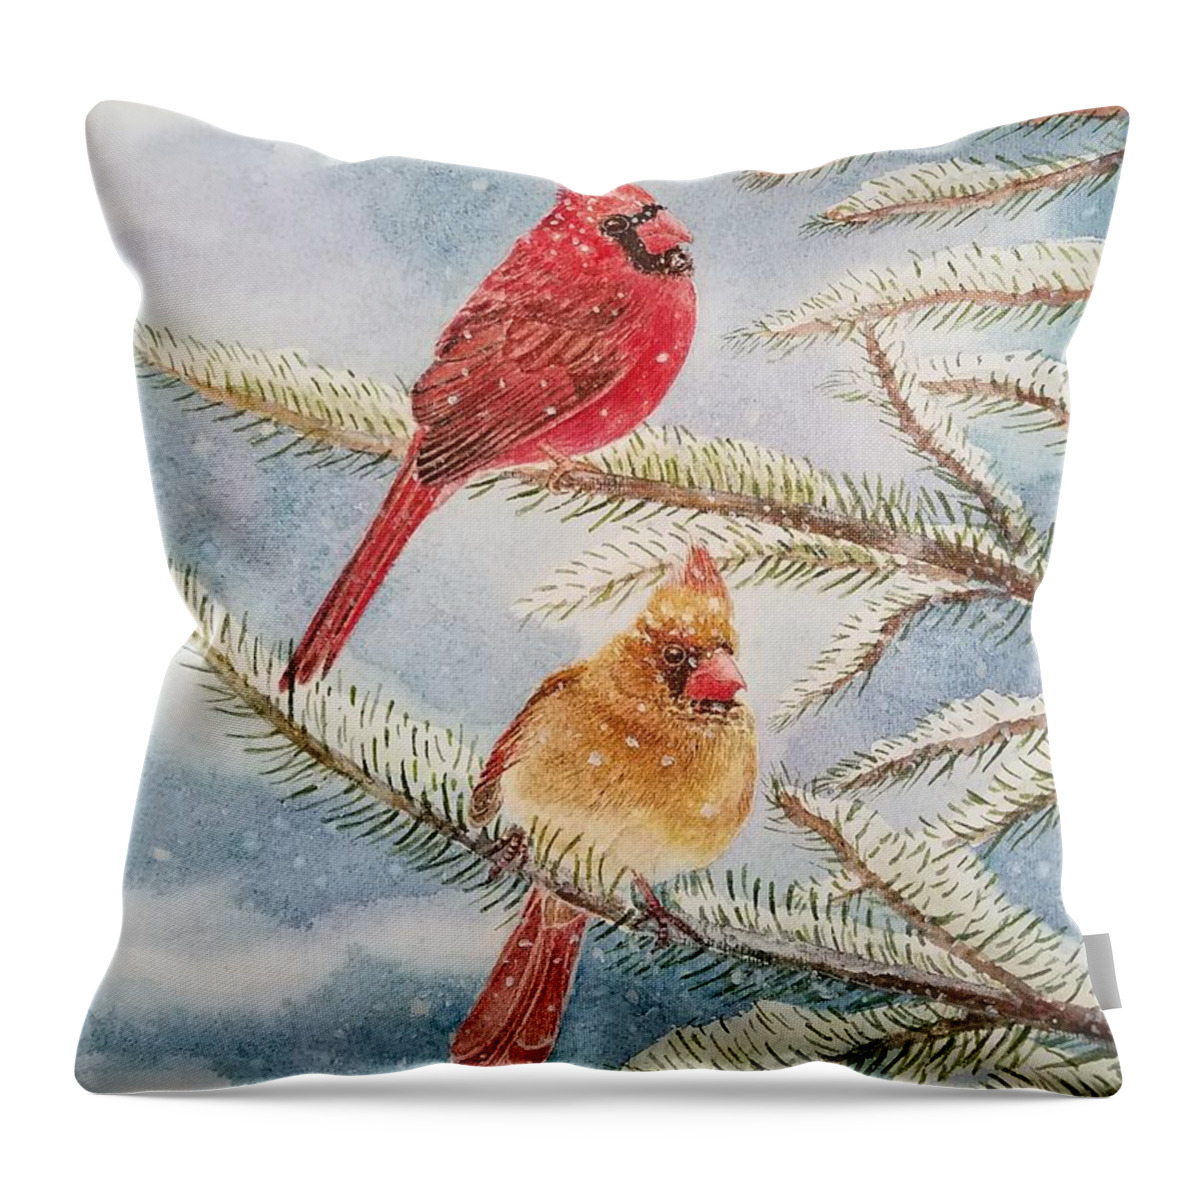 Christmas Throw Pillow featuring the painting Nothern Cardinals On Snowy Days by Jane Powell